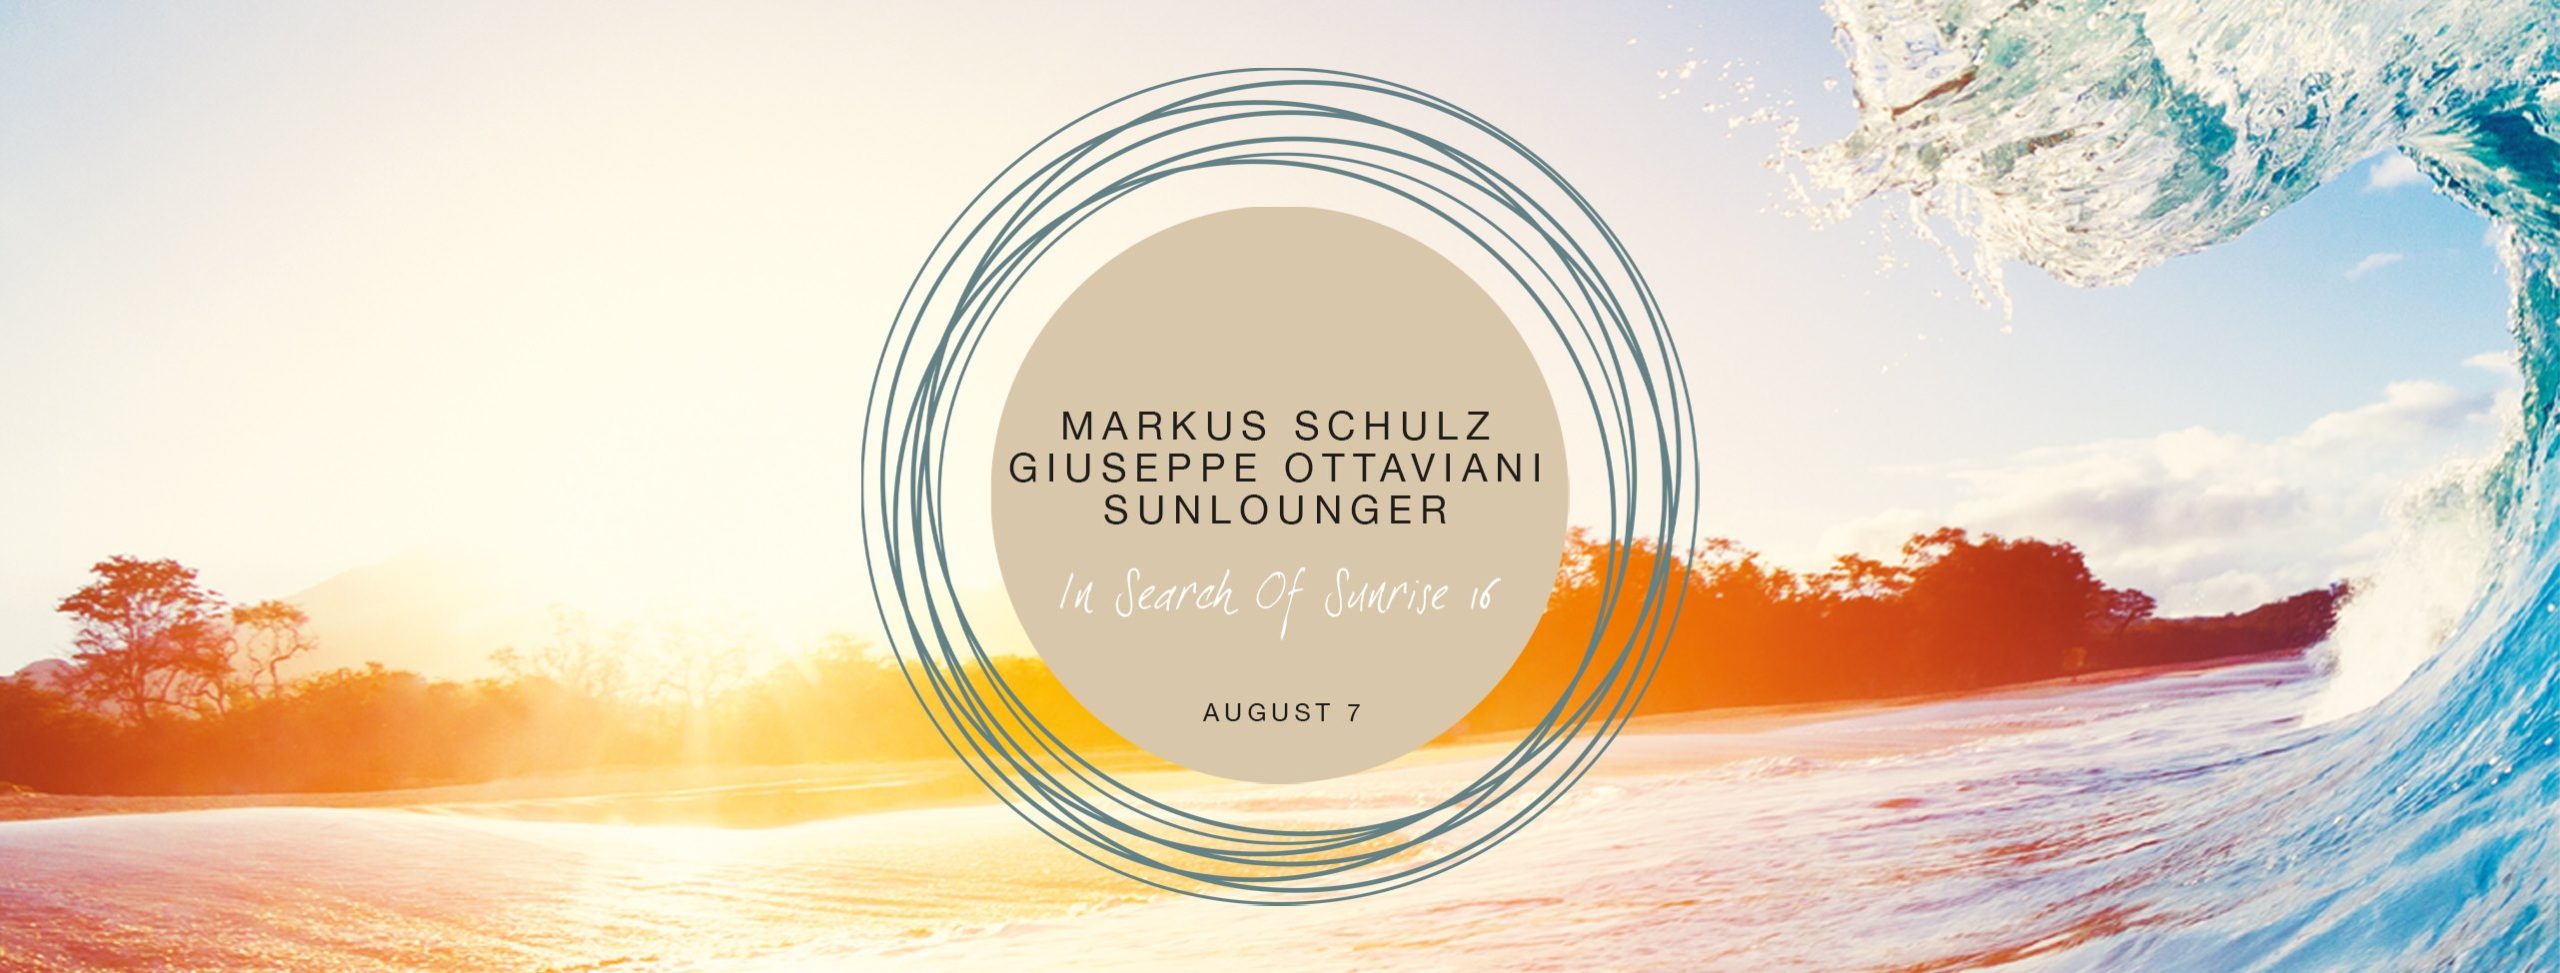 Various Artists presents In Search Of Sunrise 16 mixed by Markus Schulz, Giuseppe Ottaviani and Sunlounger on Black Hole Recordings